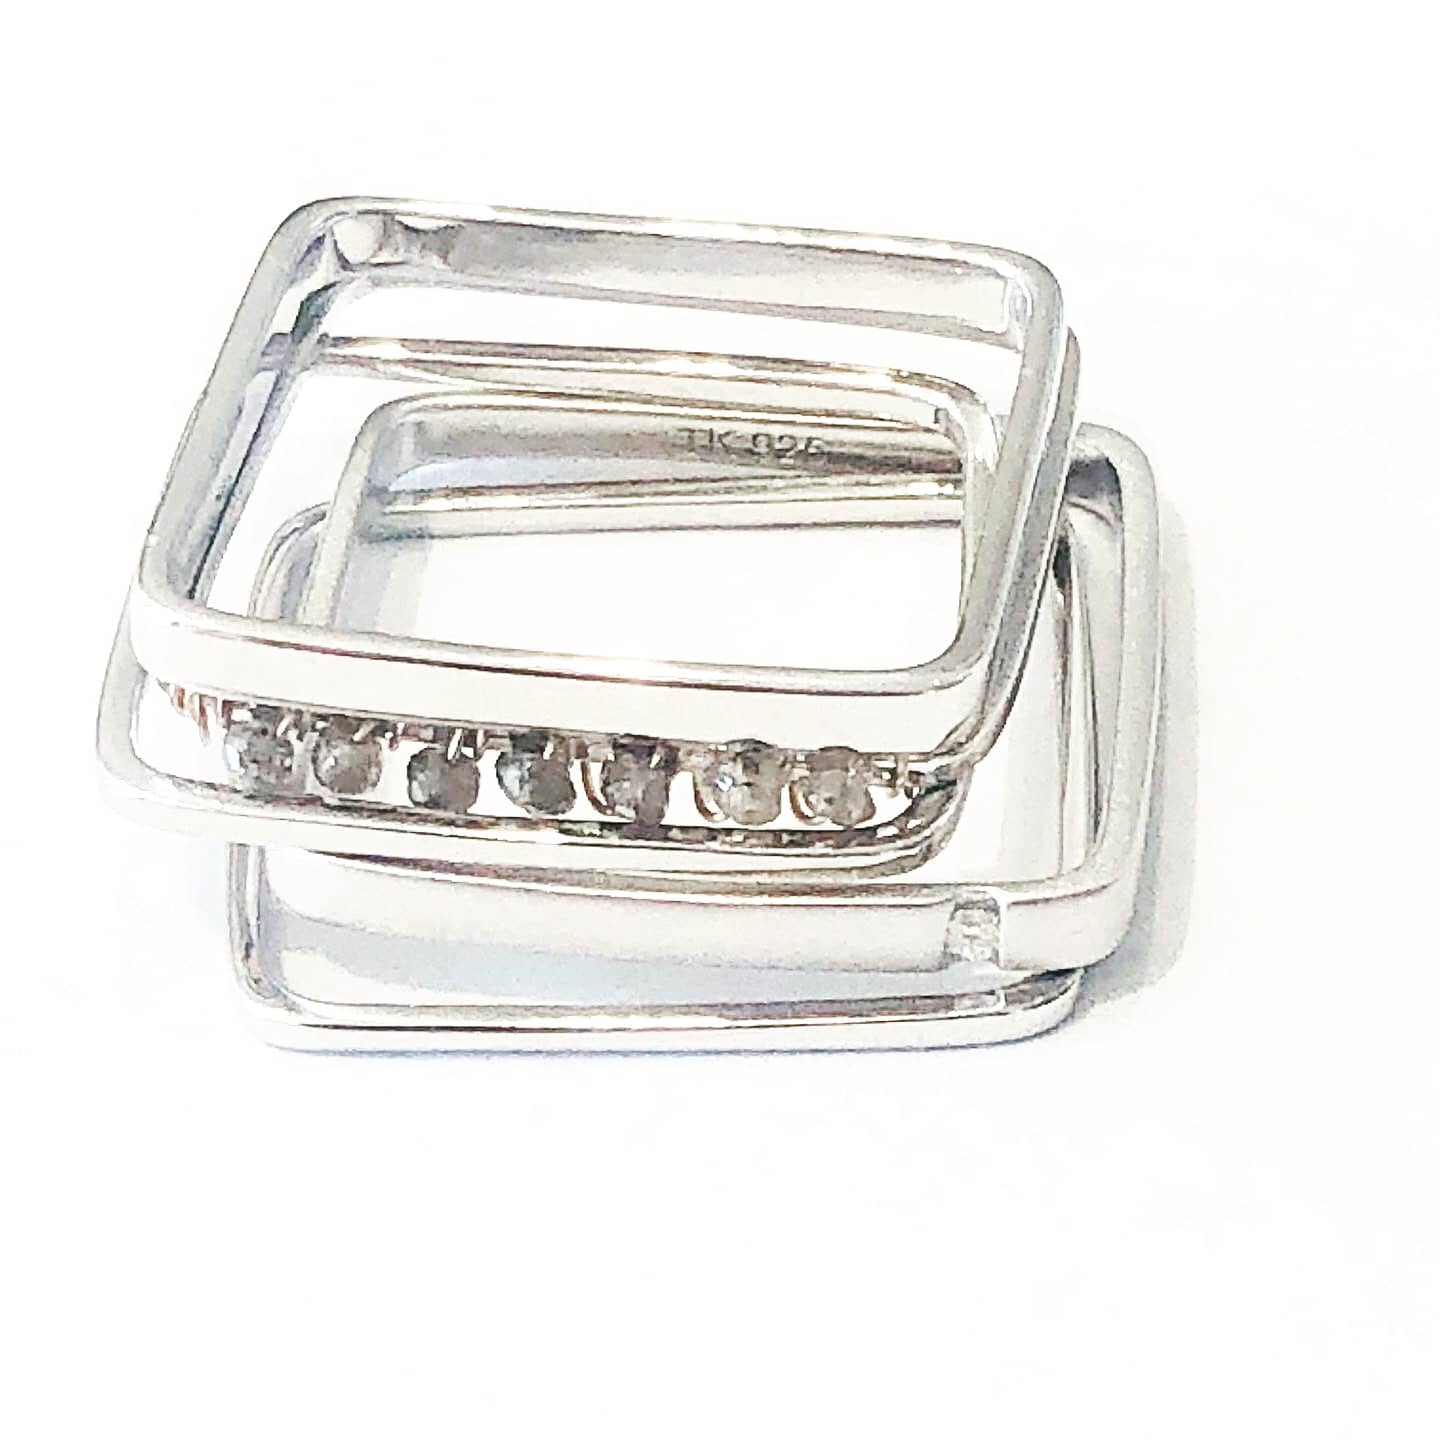 Julie Tuton-Square Sterling Stacking Rings-Shop-Local Makers